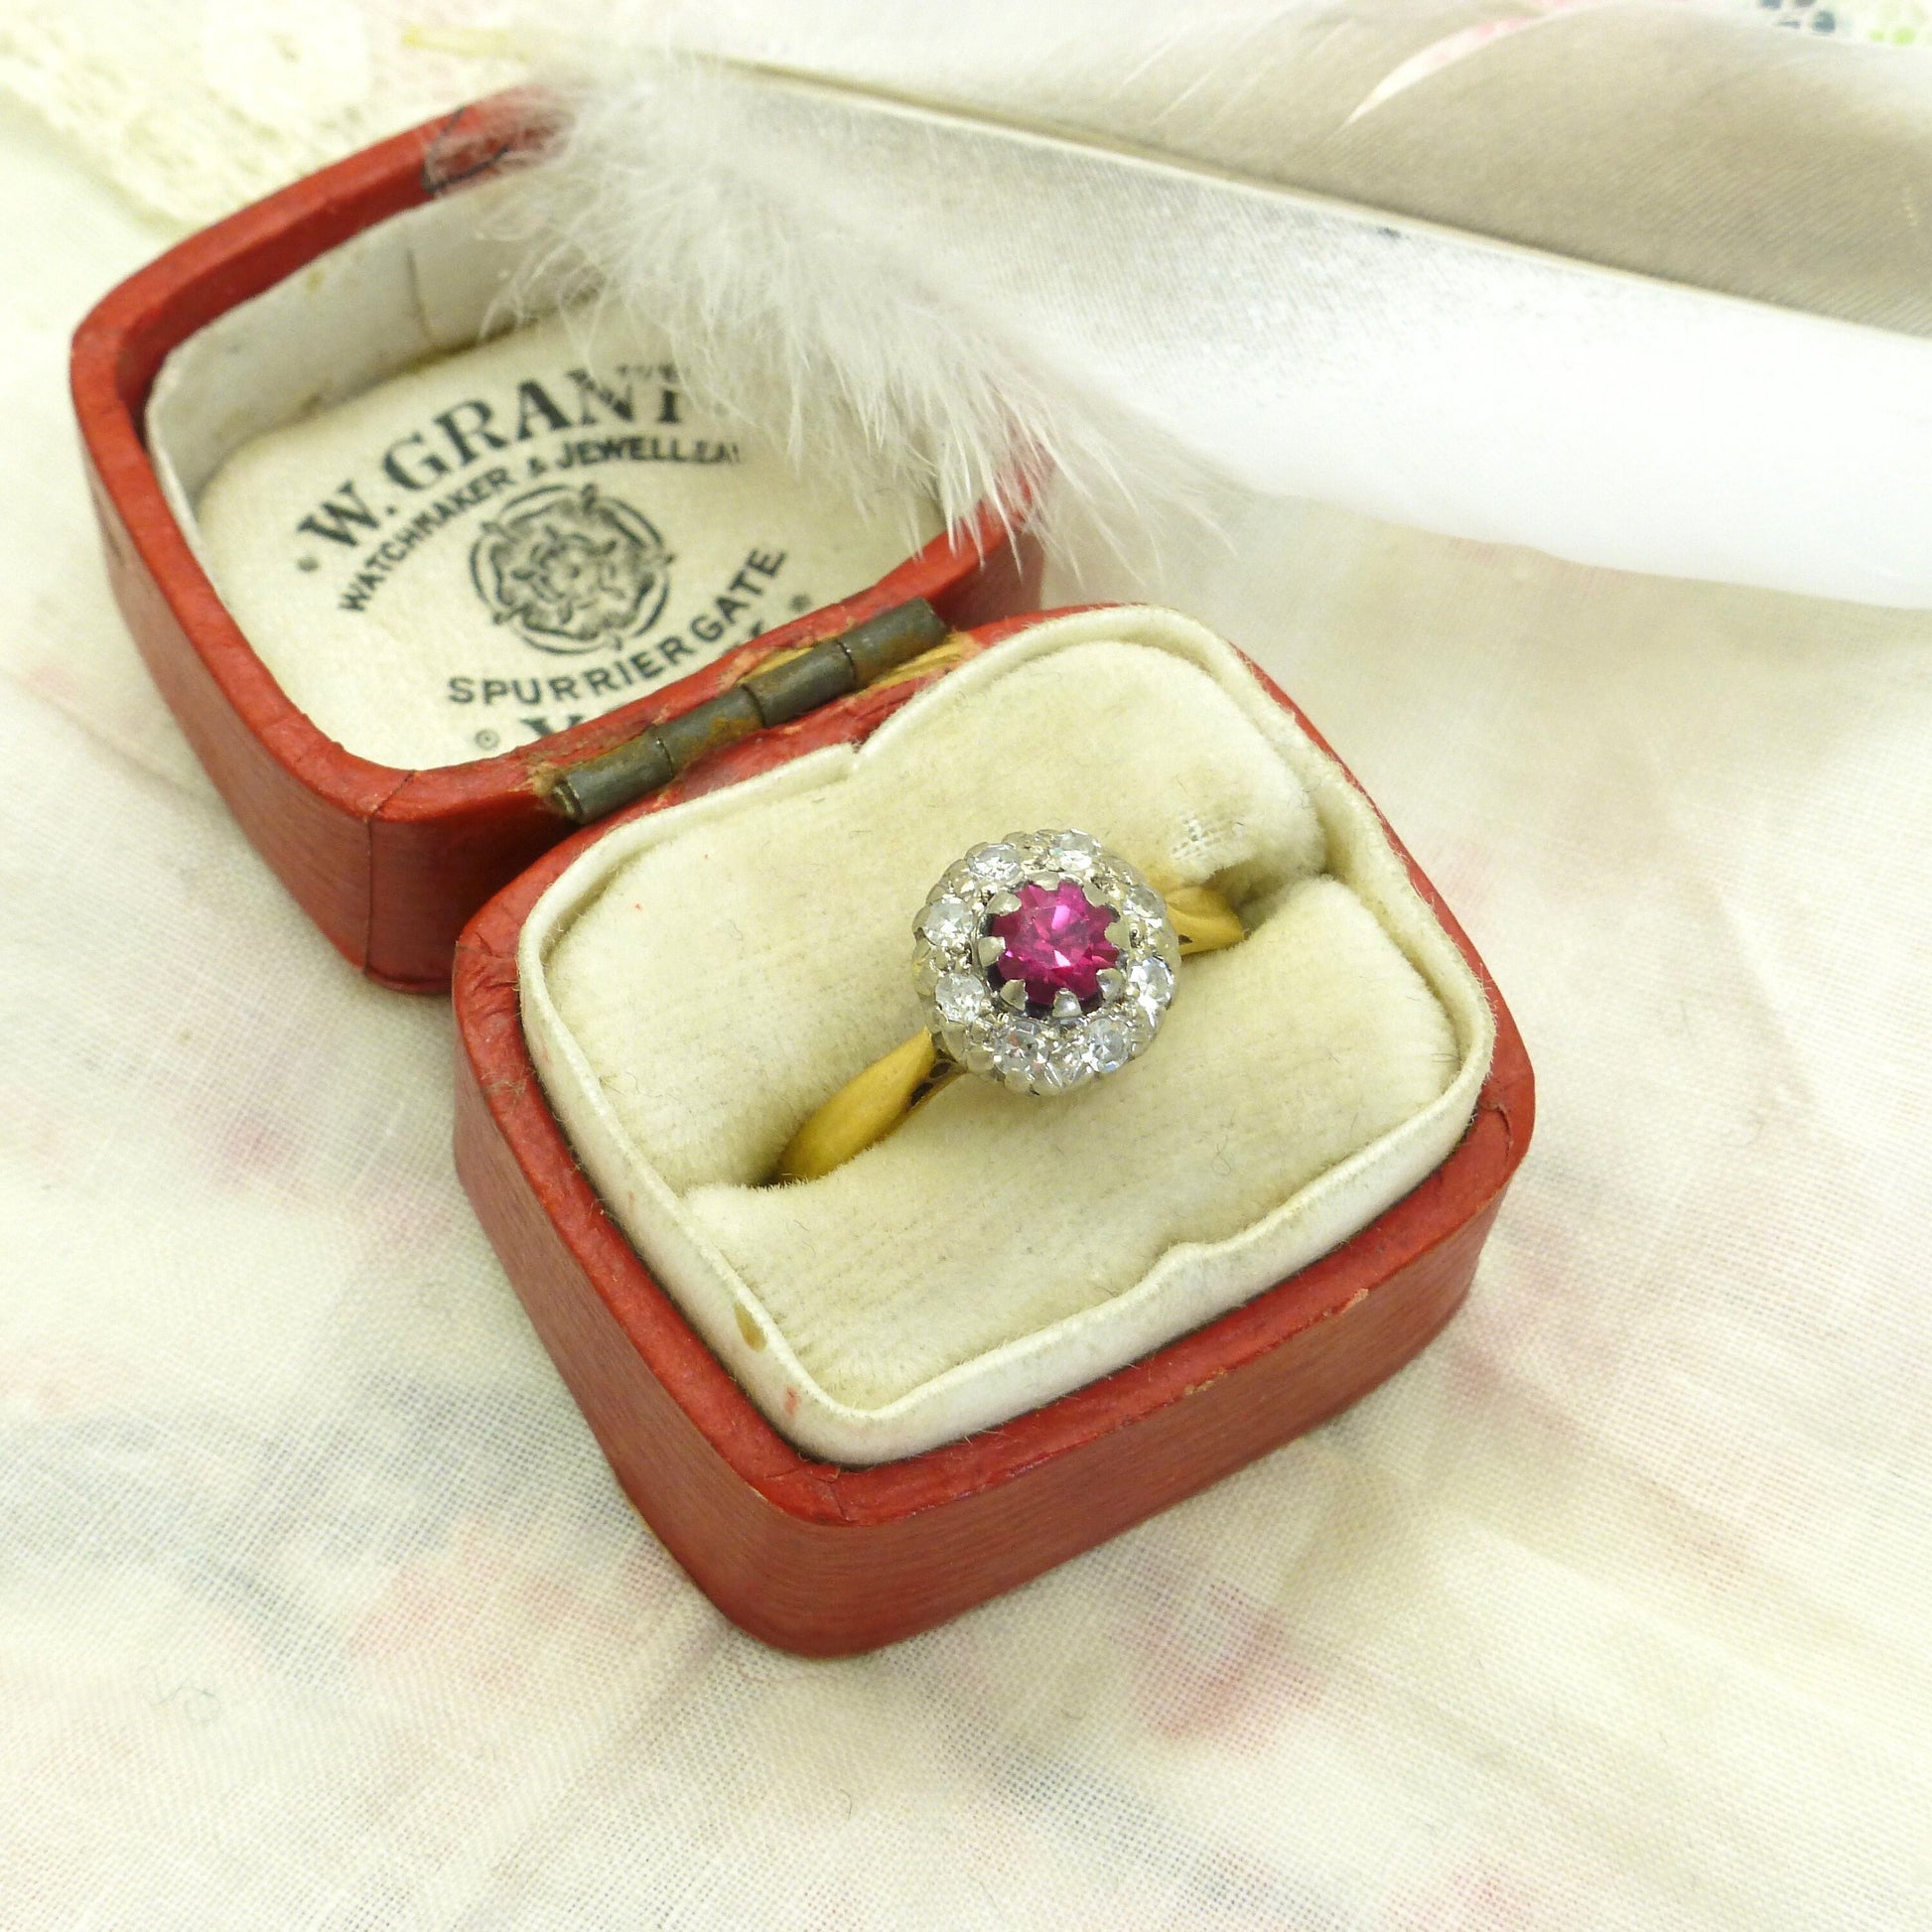 Antique 18ct ruby & diamond daisy cluster ring c1920's